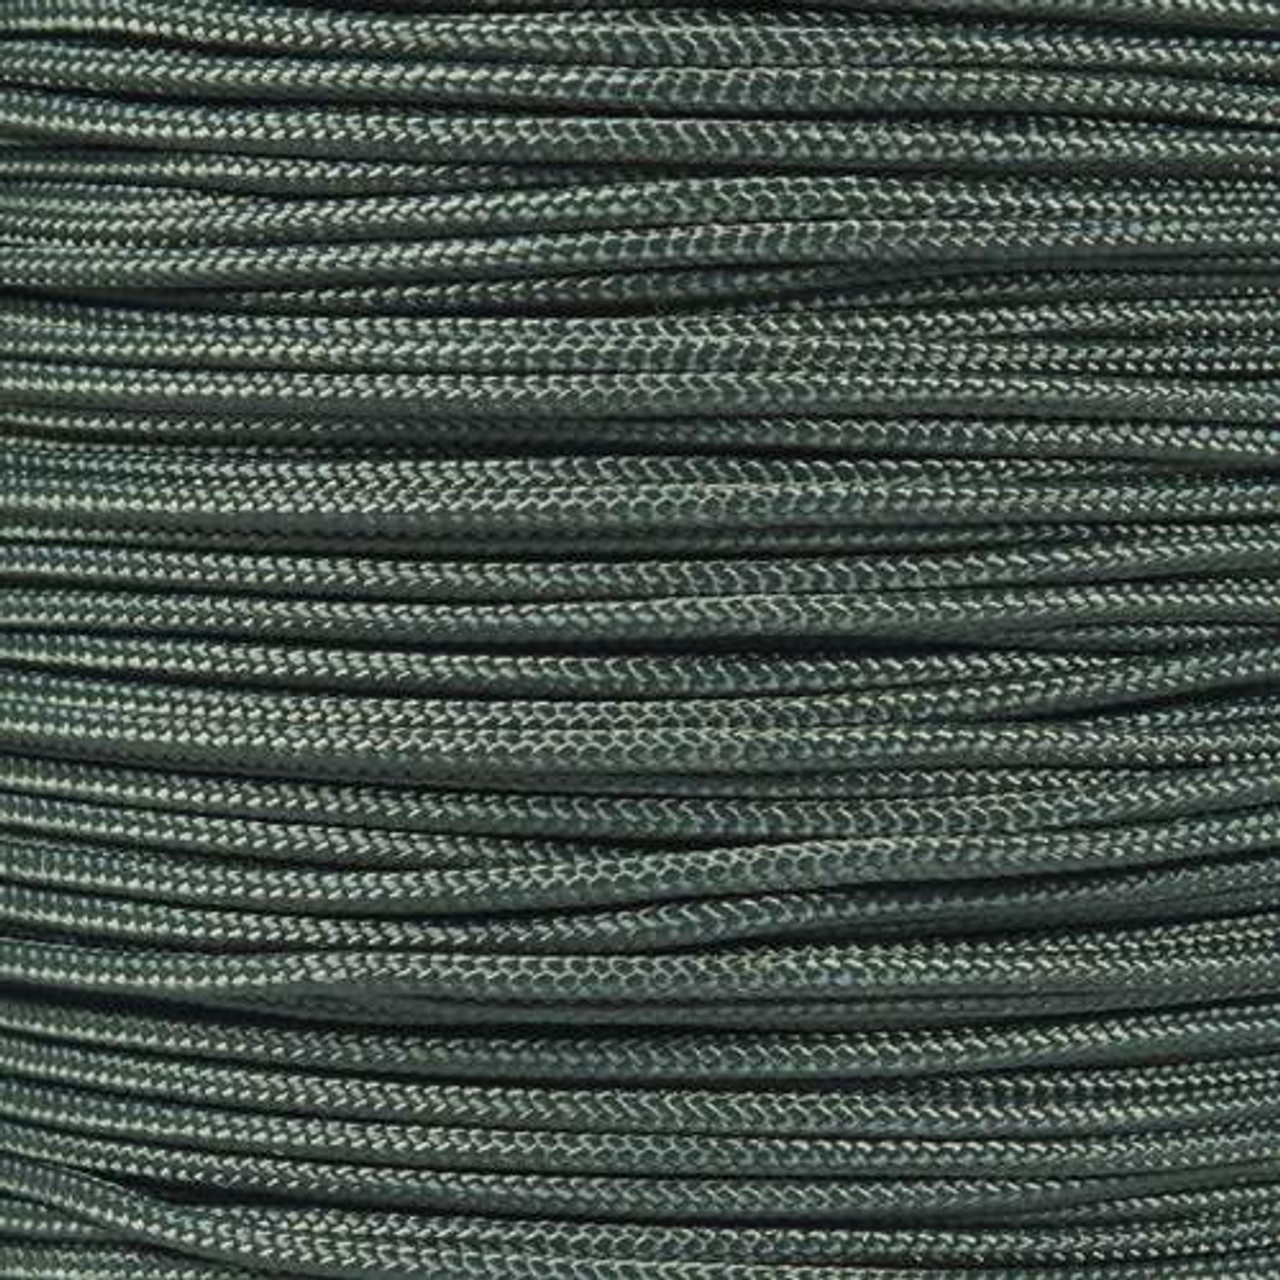 Olive Drab 425 3-Strand Commercial Grade Paracord